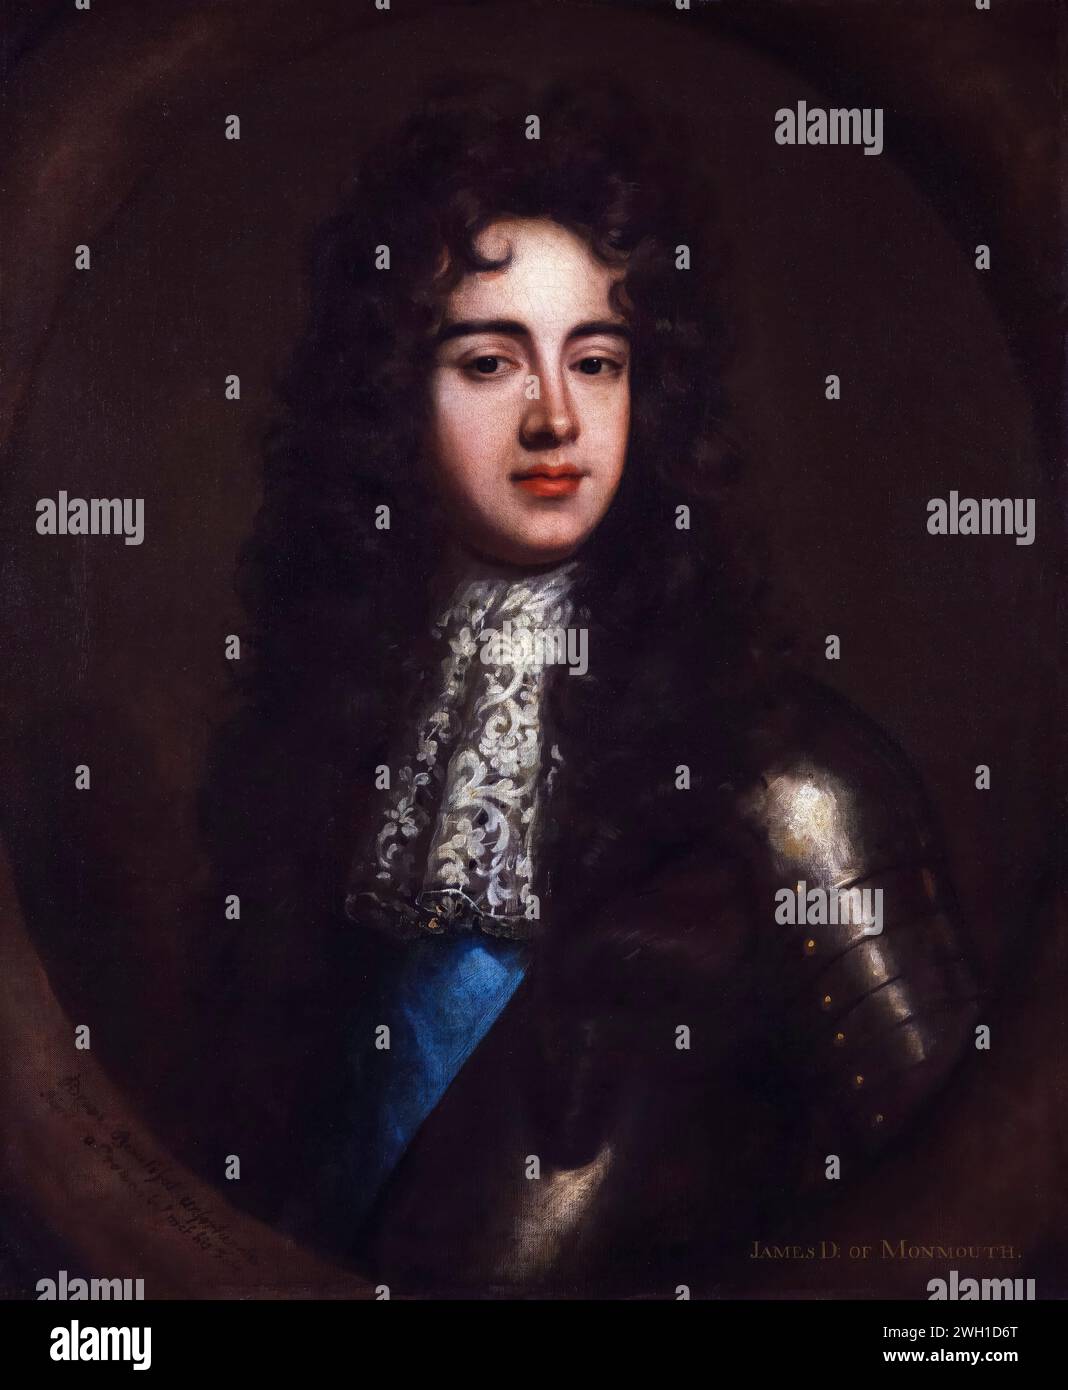 James Scott, 1st Duke of Monmouth, 1st Duke of Buccleuch (1649-1685), Dutch-born English nobleman and military officer, portrait painting in oil on canvas after Willem Wissing, circa 1683 Stock Photo